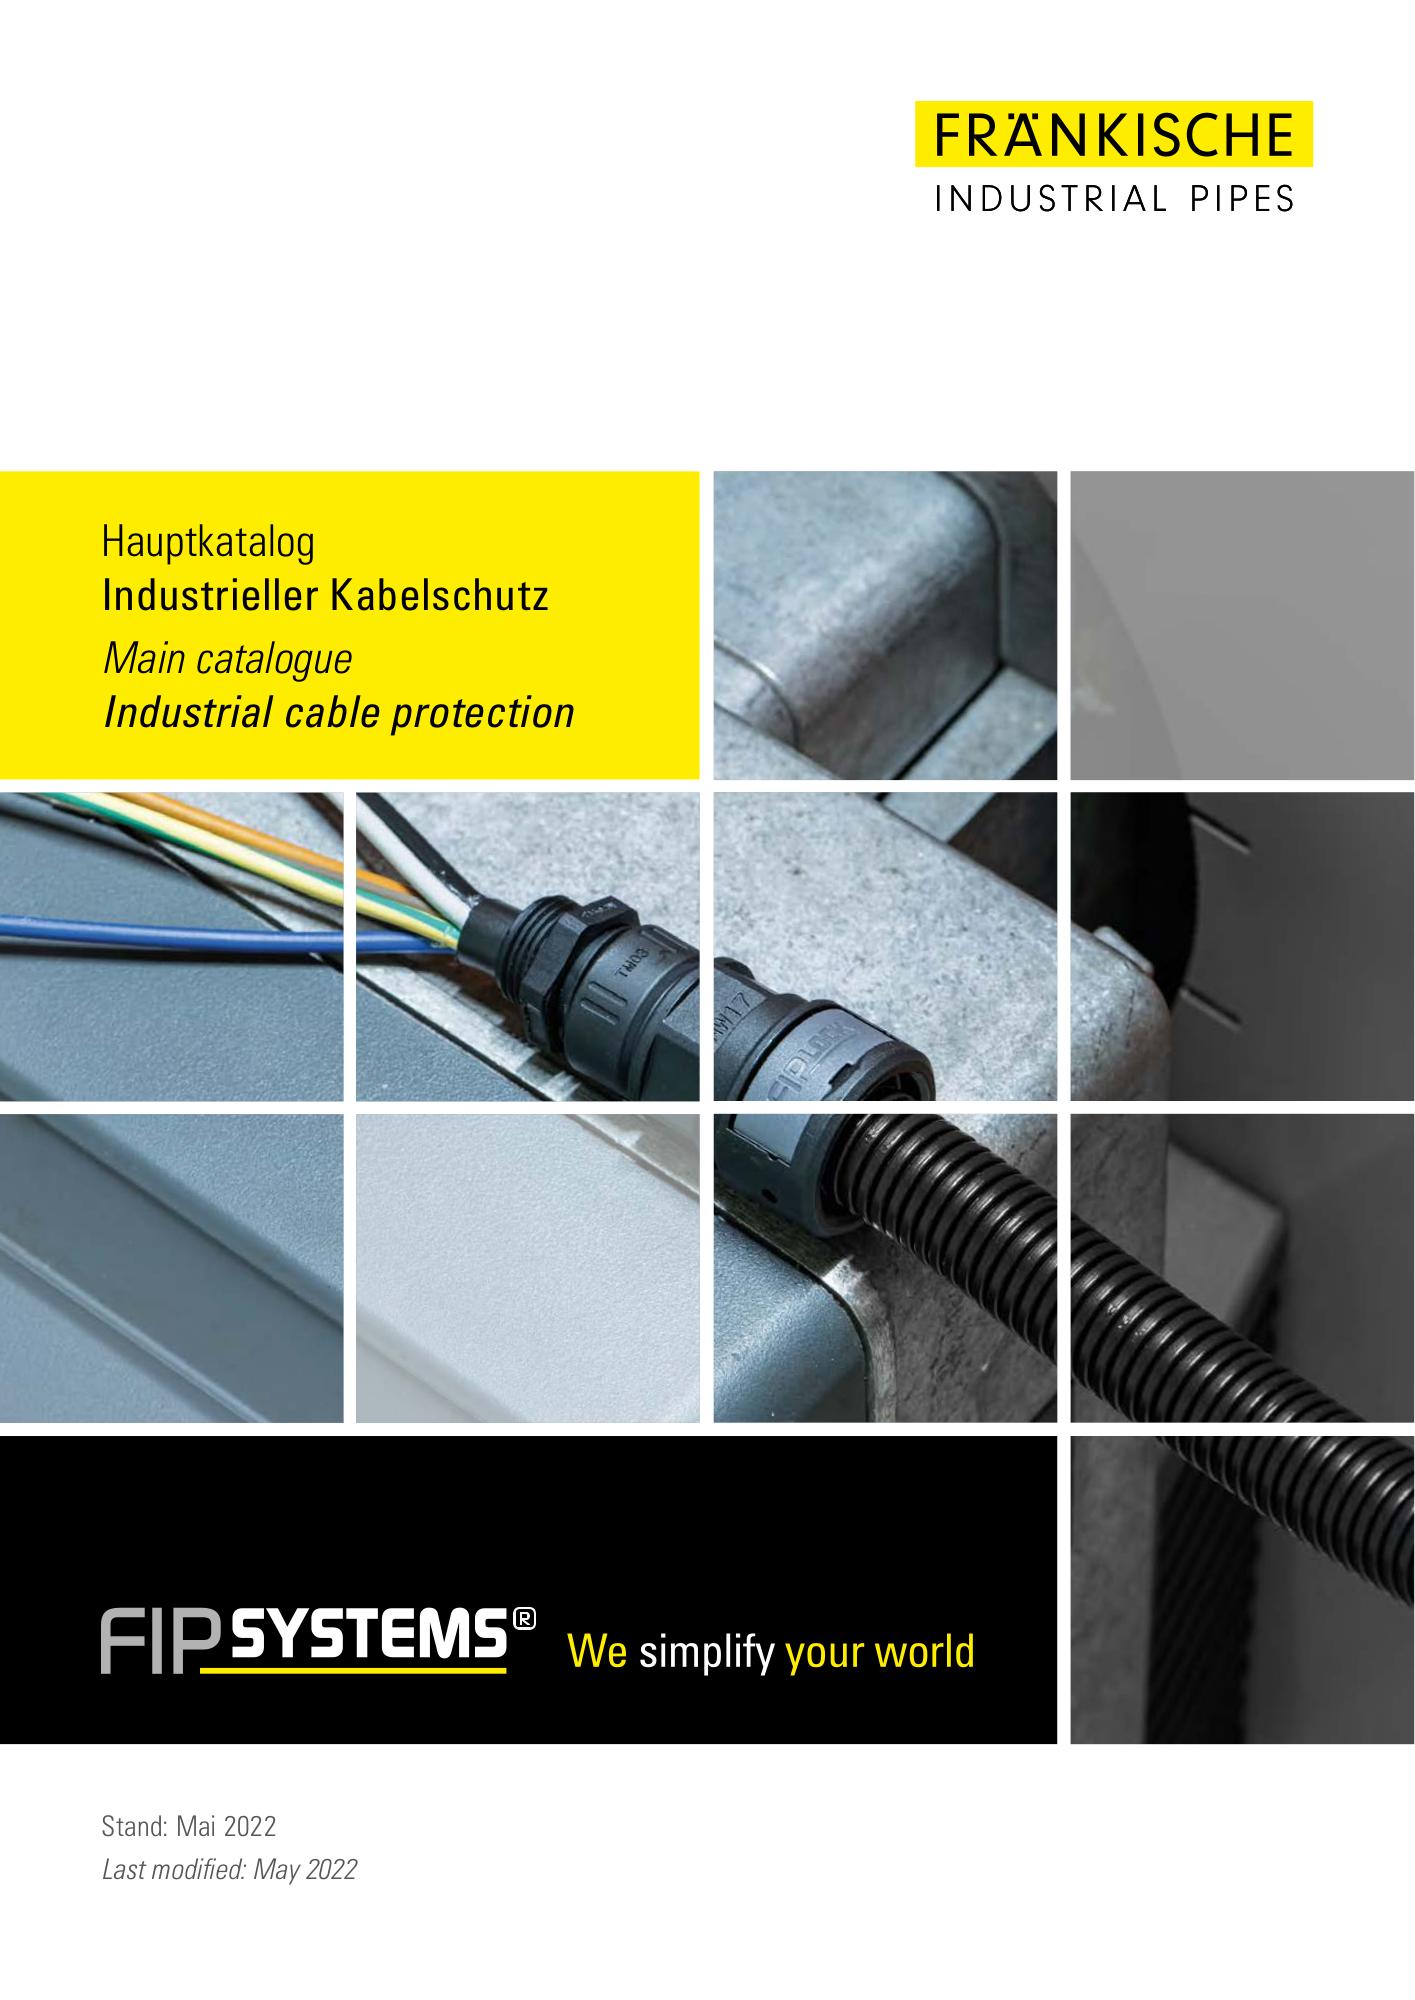 FIPSYSTEMS® Main catalogue industrial cable protection